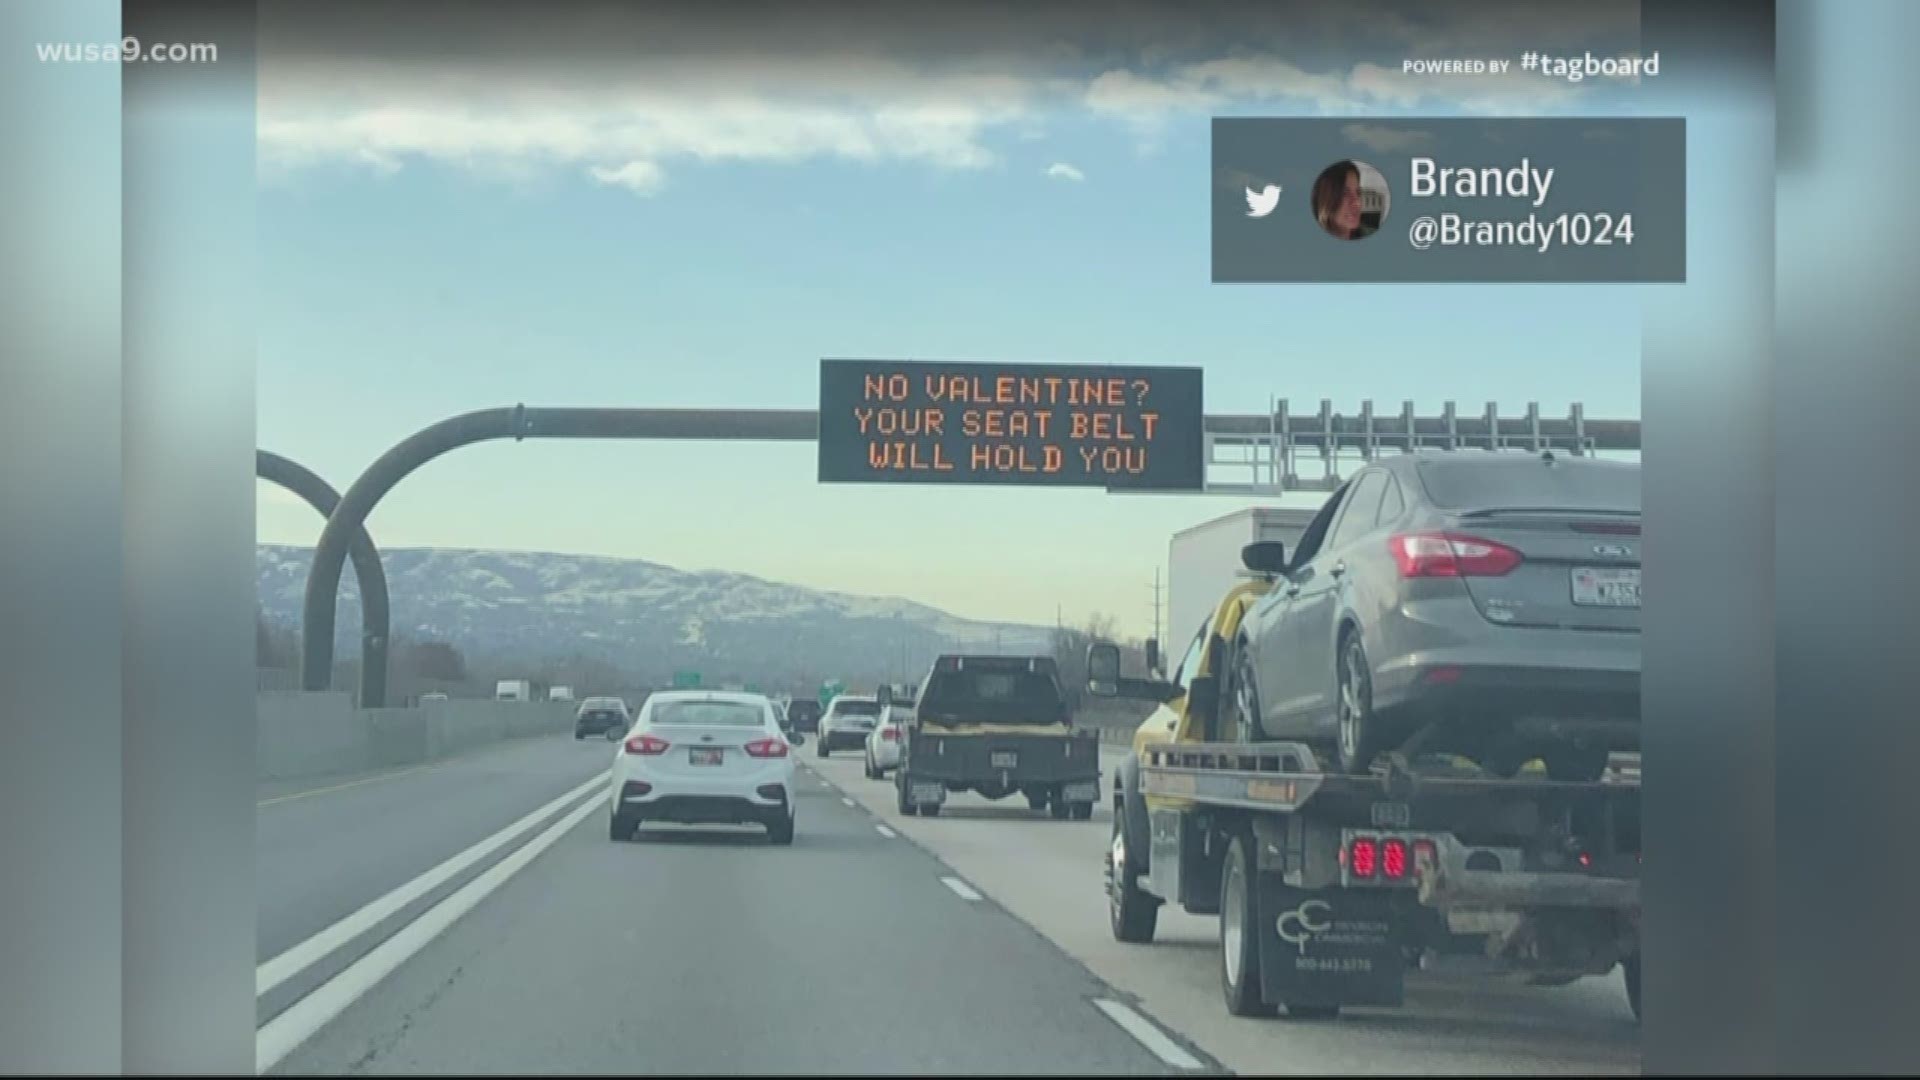 A life-saving message tells drivers to let their seat belt hold them this Valentine's Day is our Most D.C. Thing.